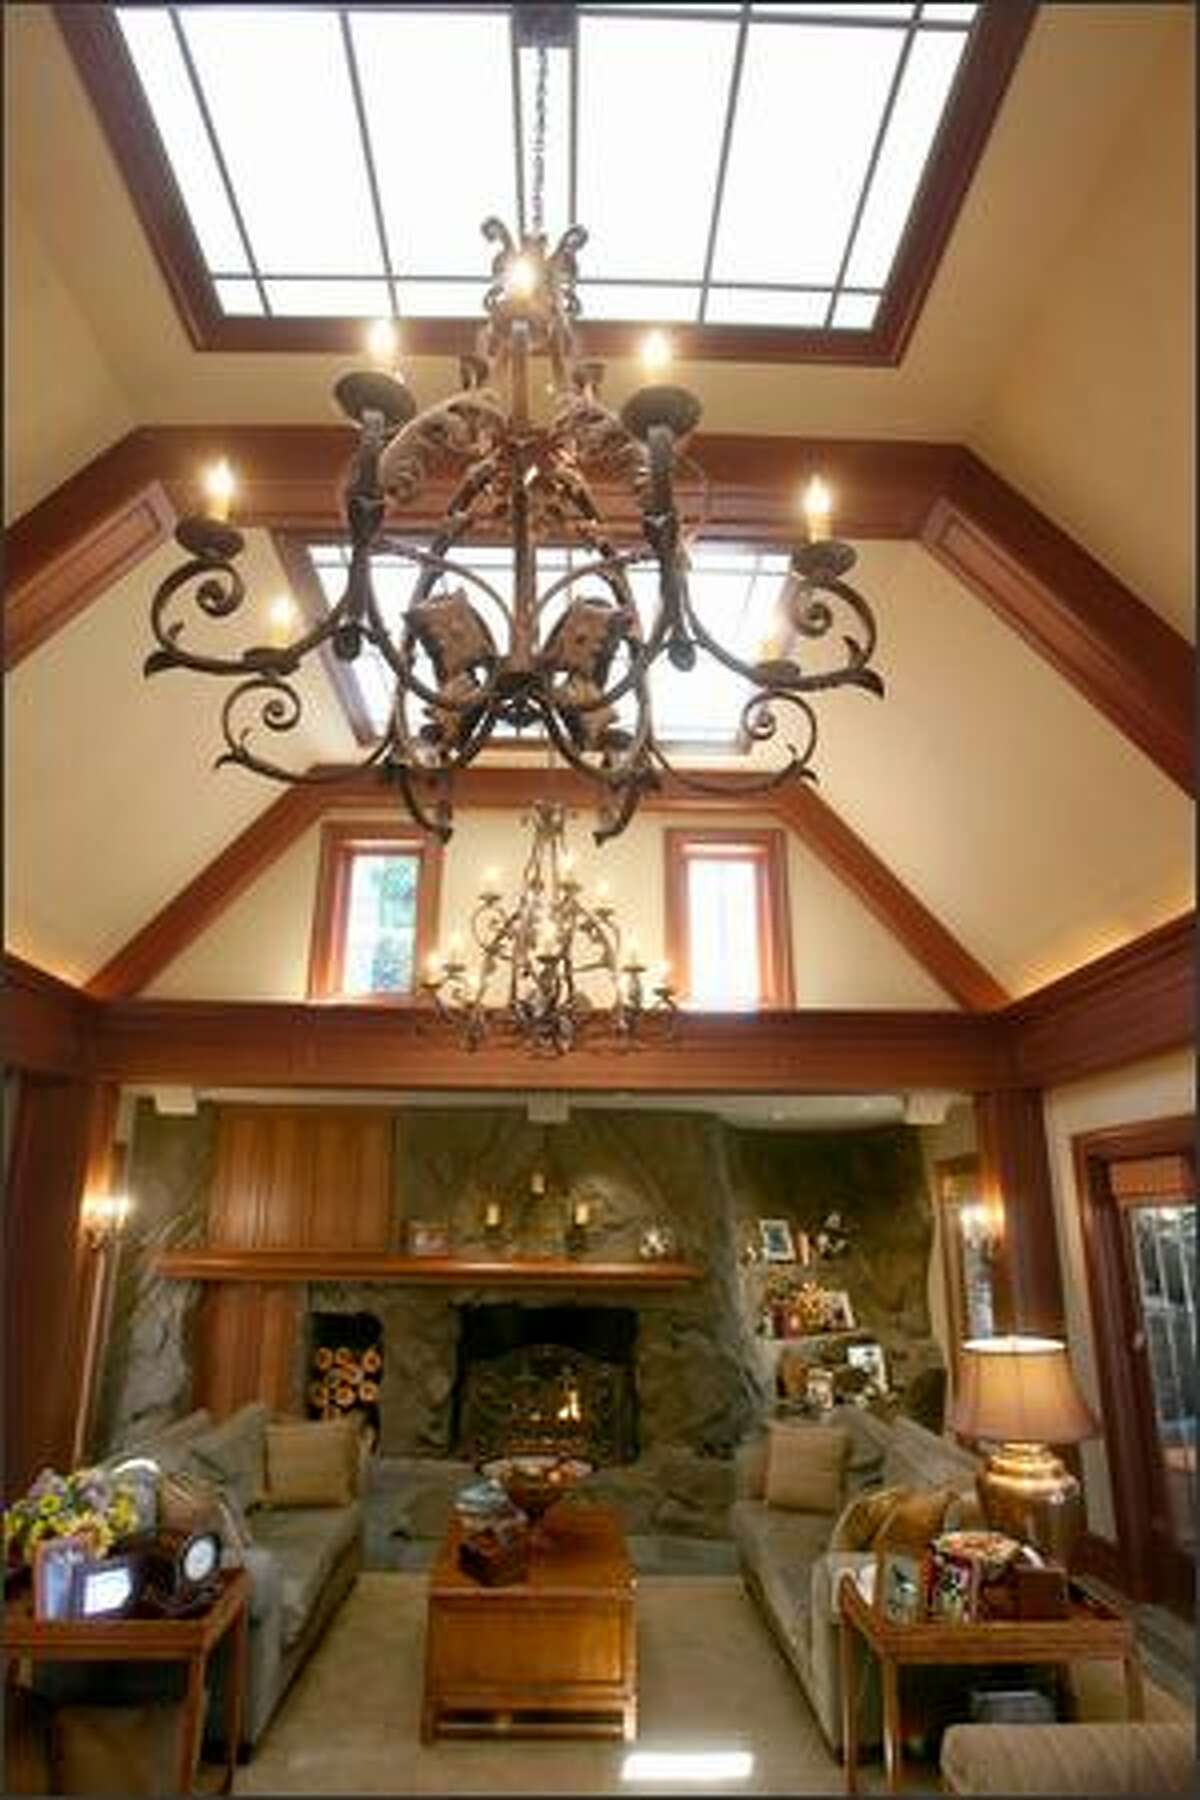 The family room.